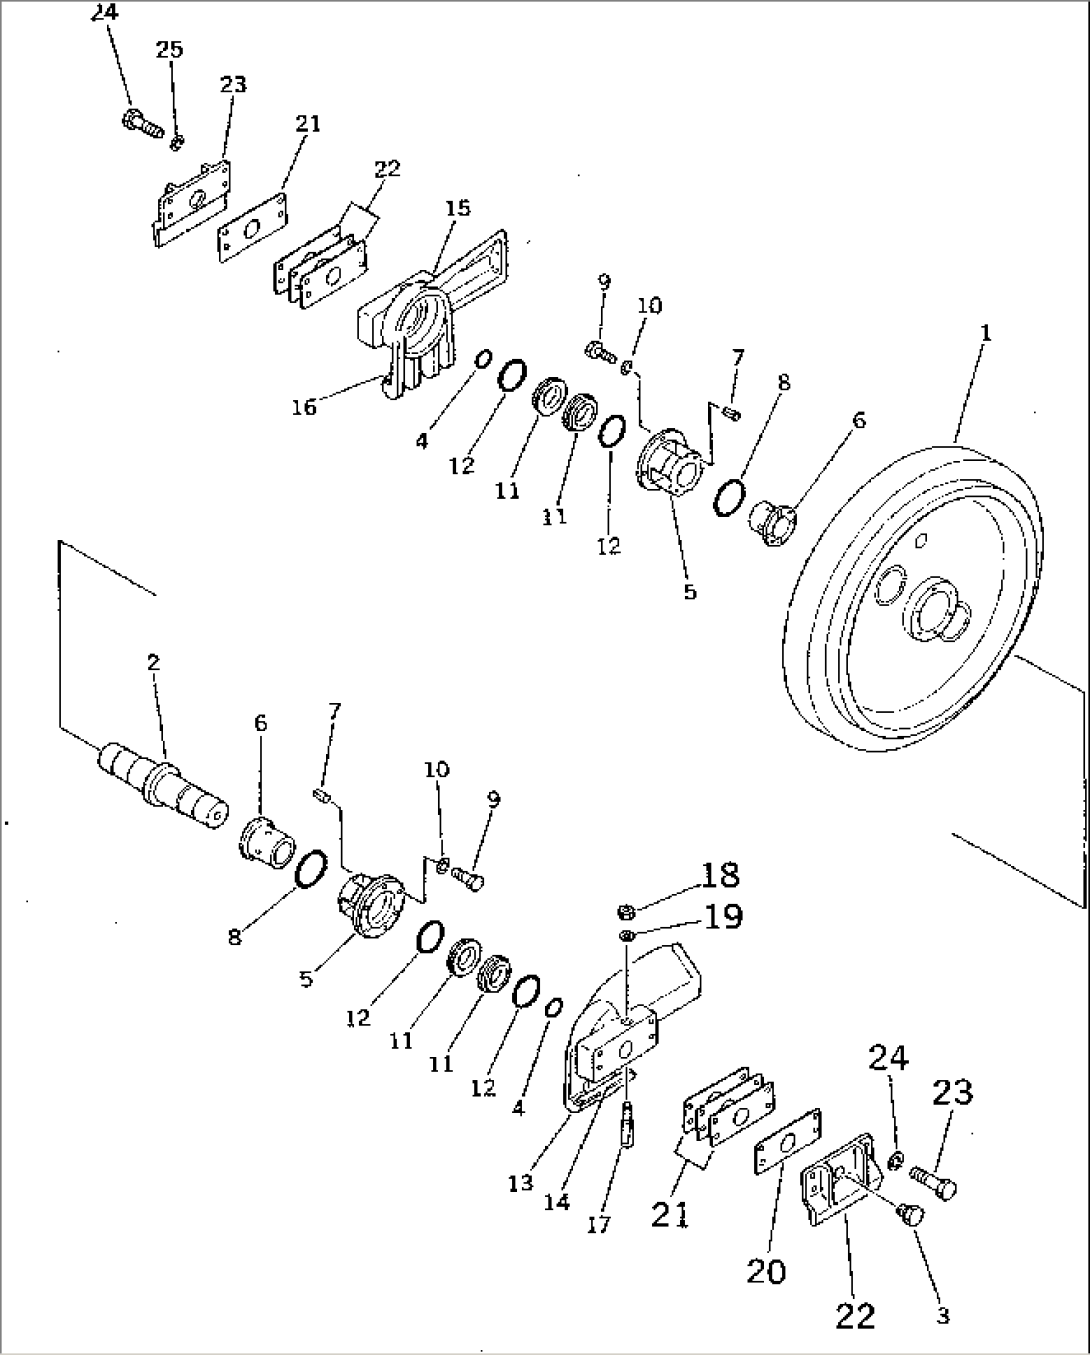 FRONT IDLER (FOR STRENGTHENED TRACK)